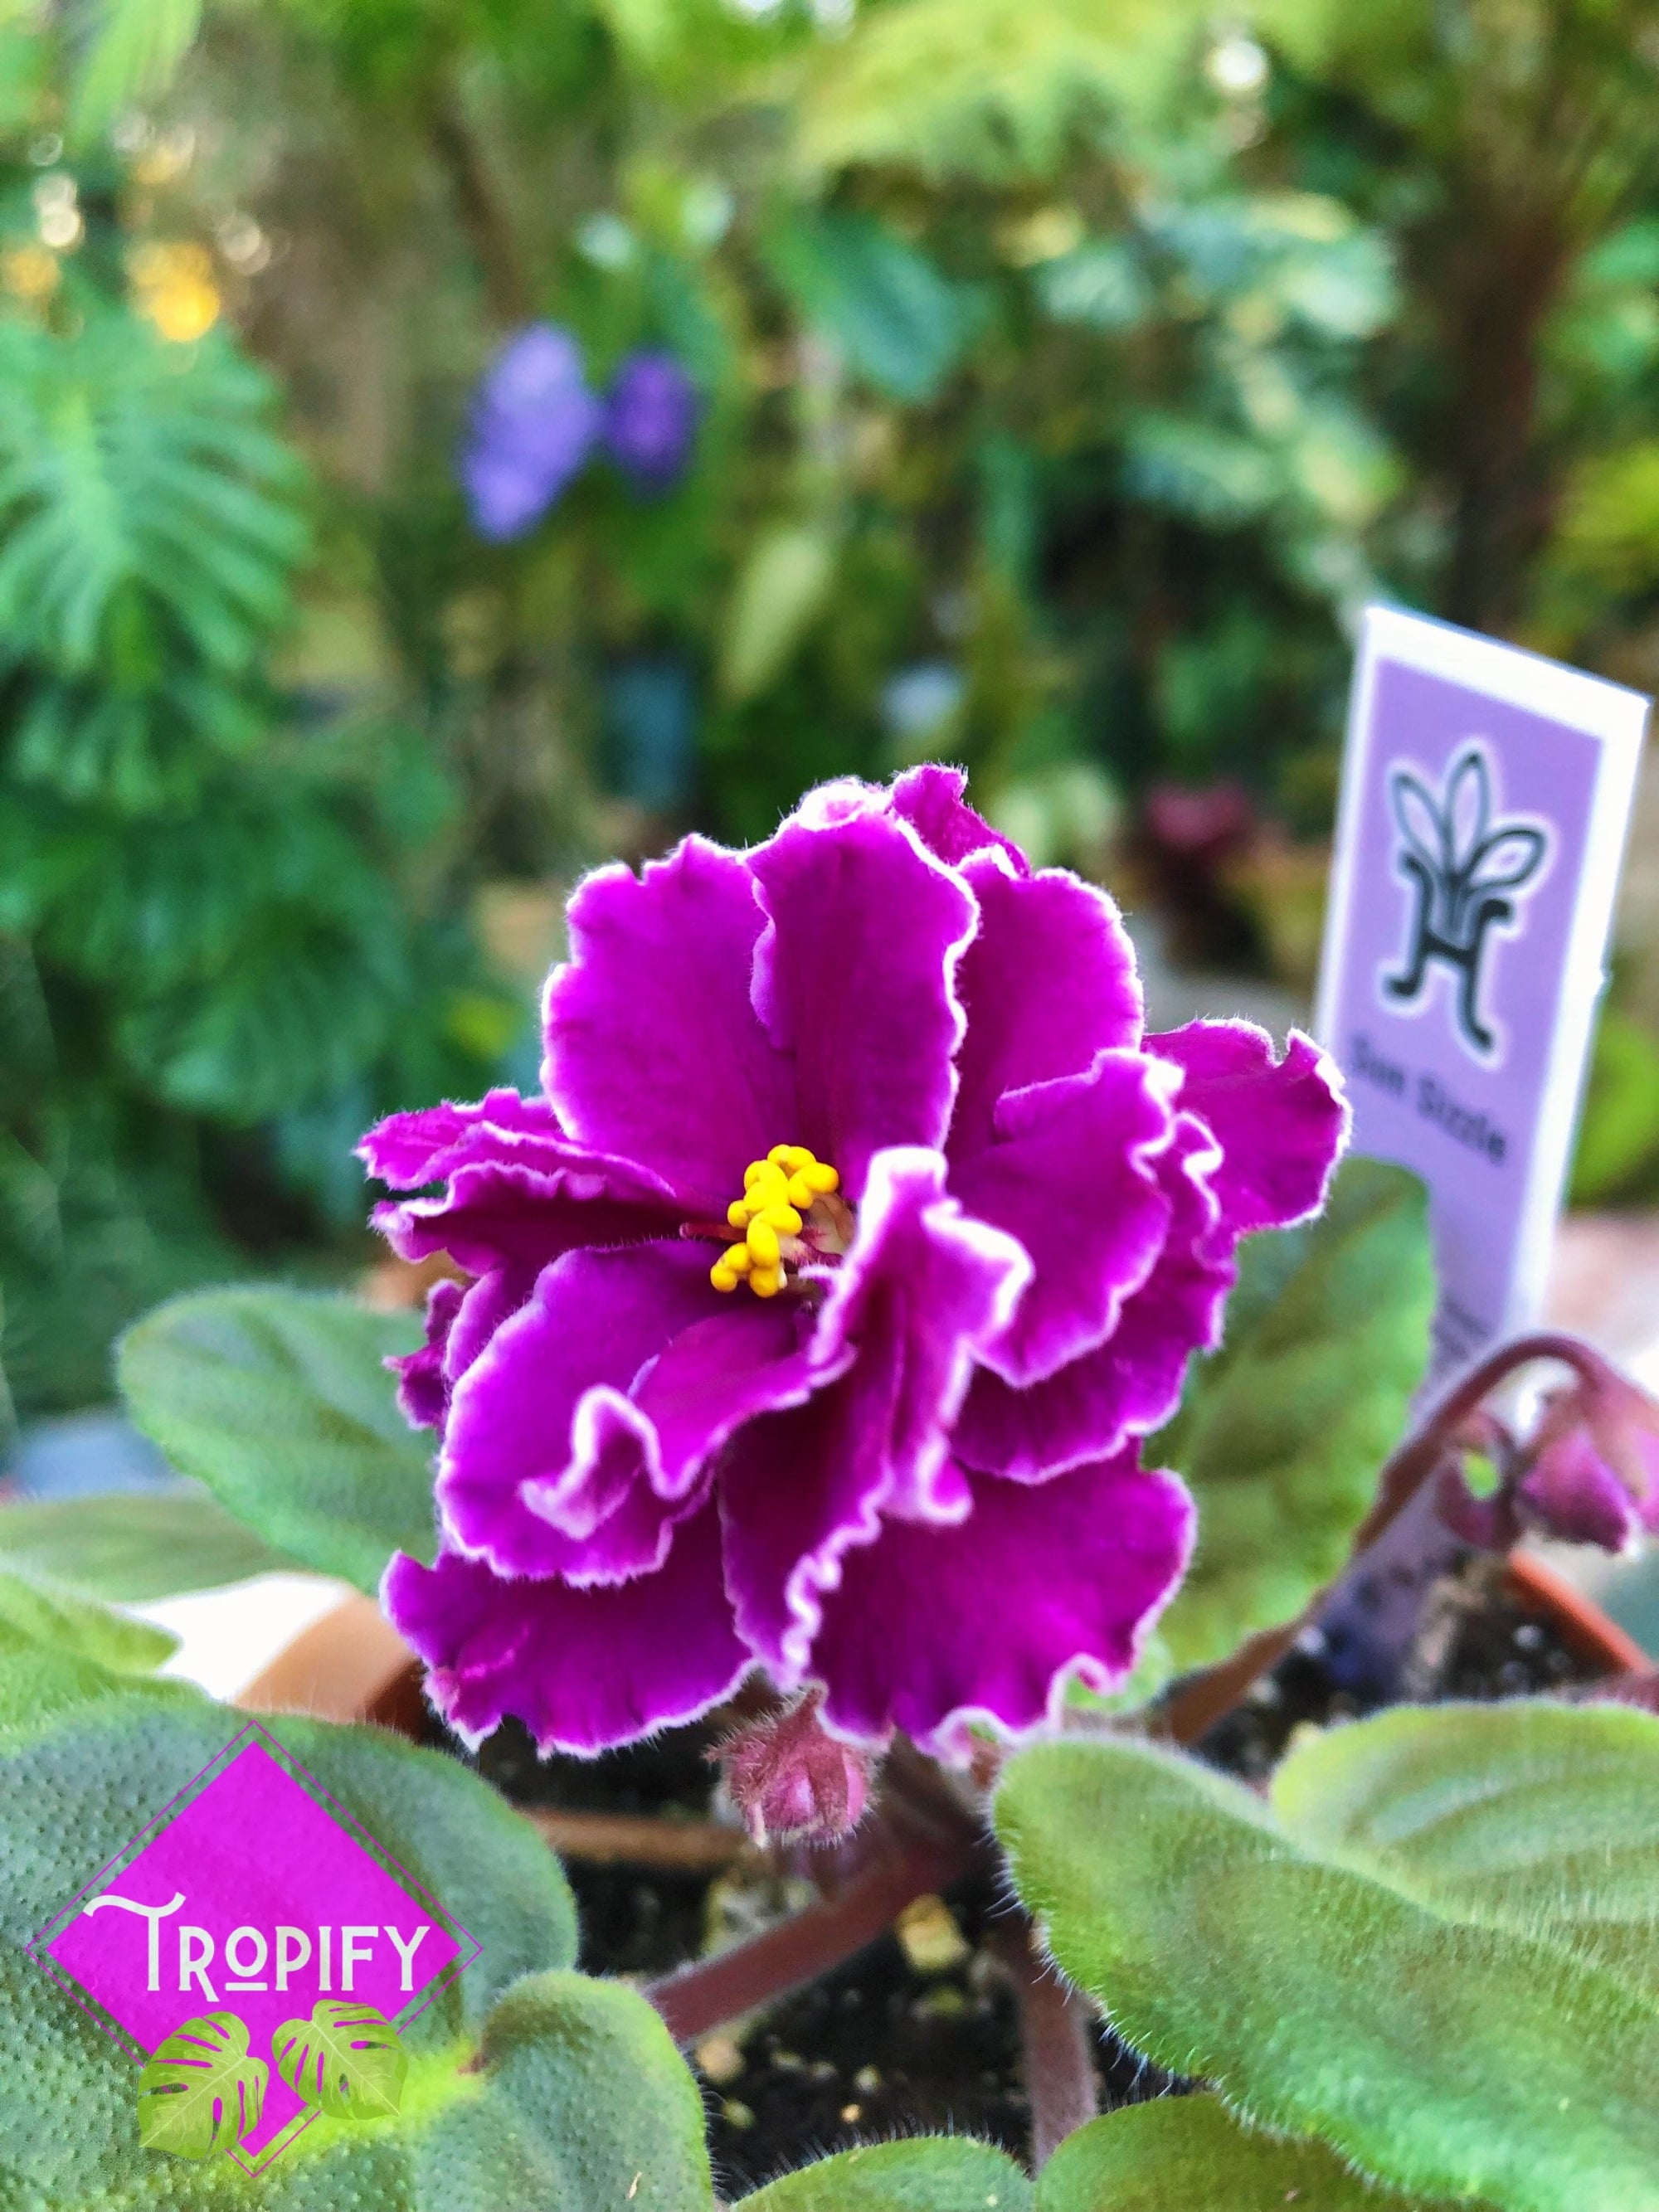 Live house plant variegated African Violet Harmony’s ‘Sun Sizzle’ garden 4” flower Potted gift